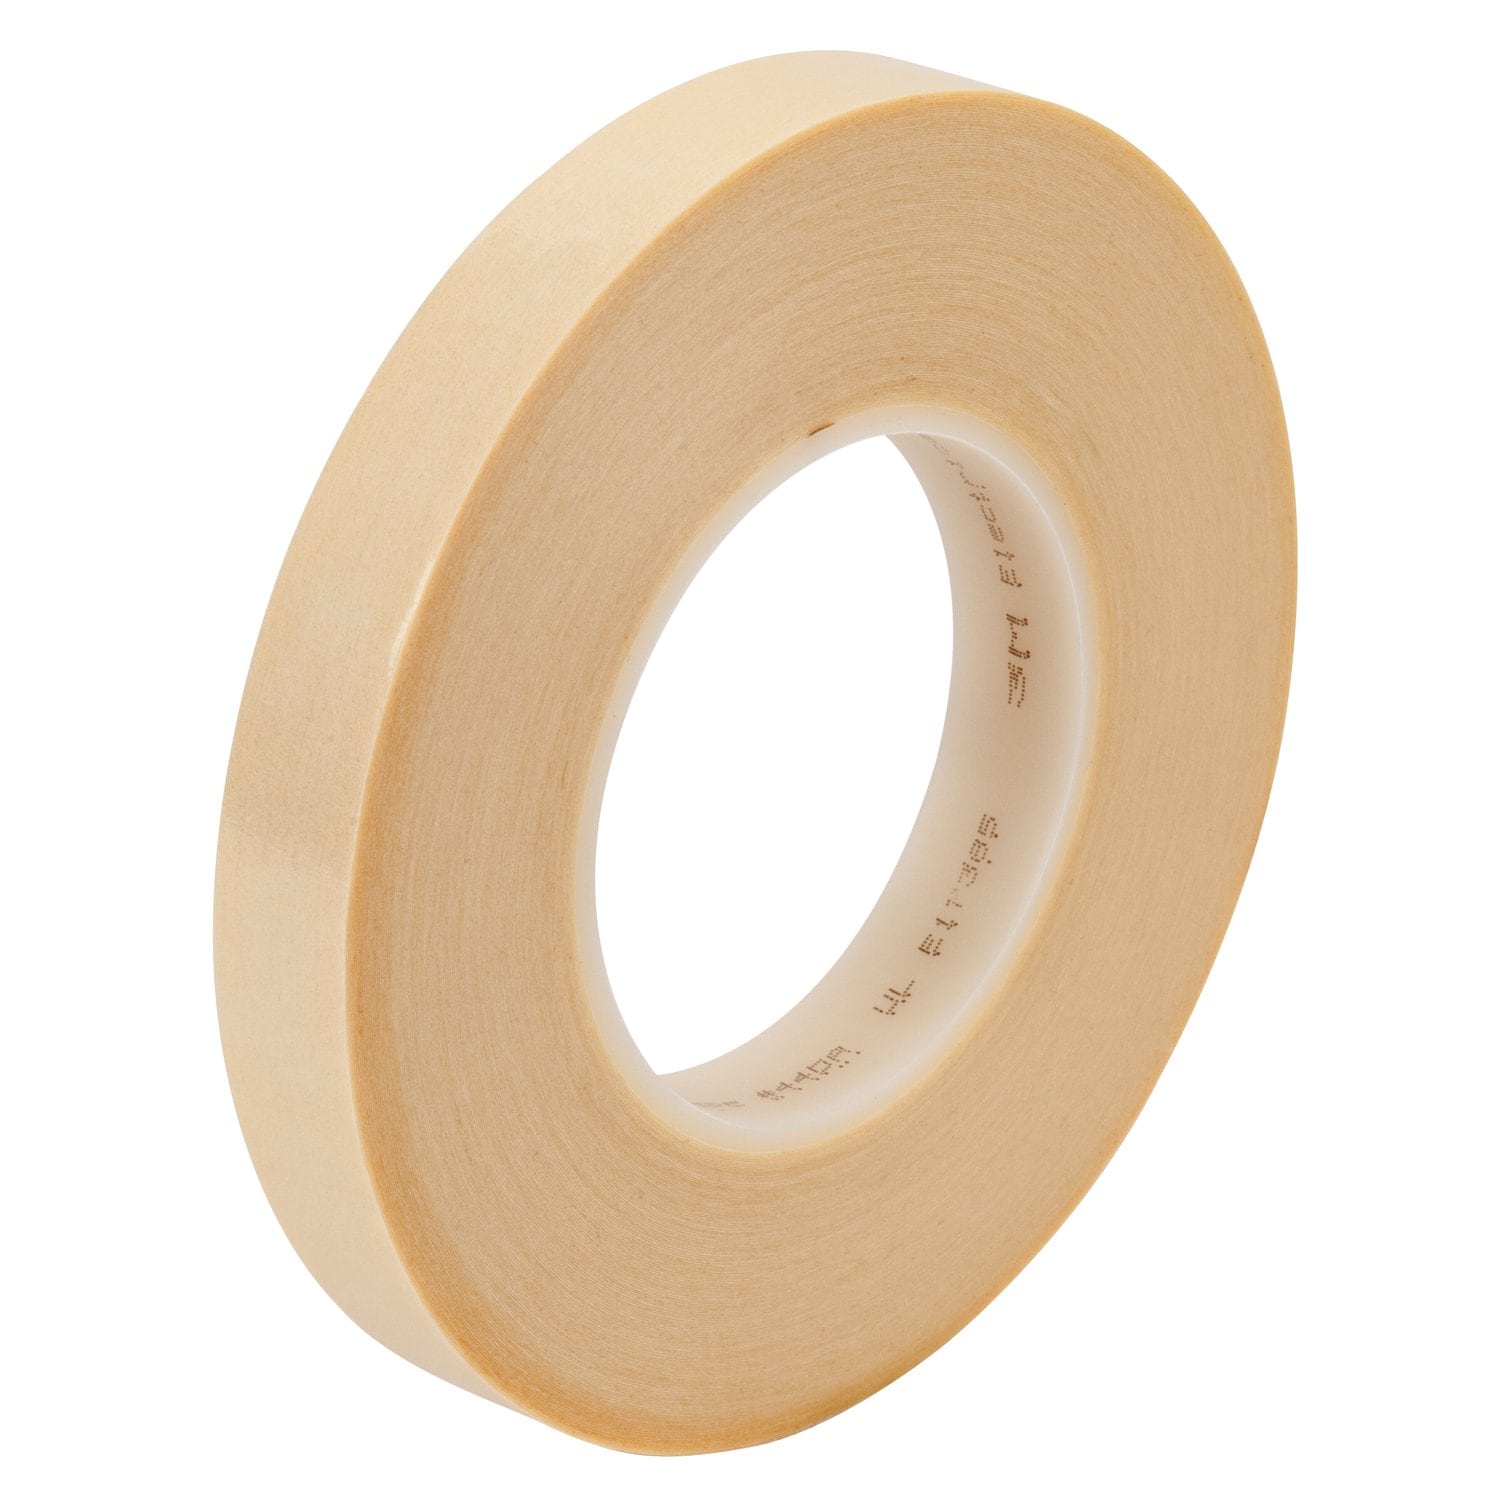 7010349209 - 3M Filament-Reinforced Electrical Tape 44D-A, 46 in x 49.2 yd (45
METERS), 3-in paper core, Log roll, 1 Roll/Case